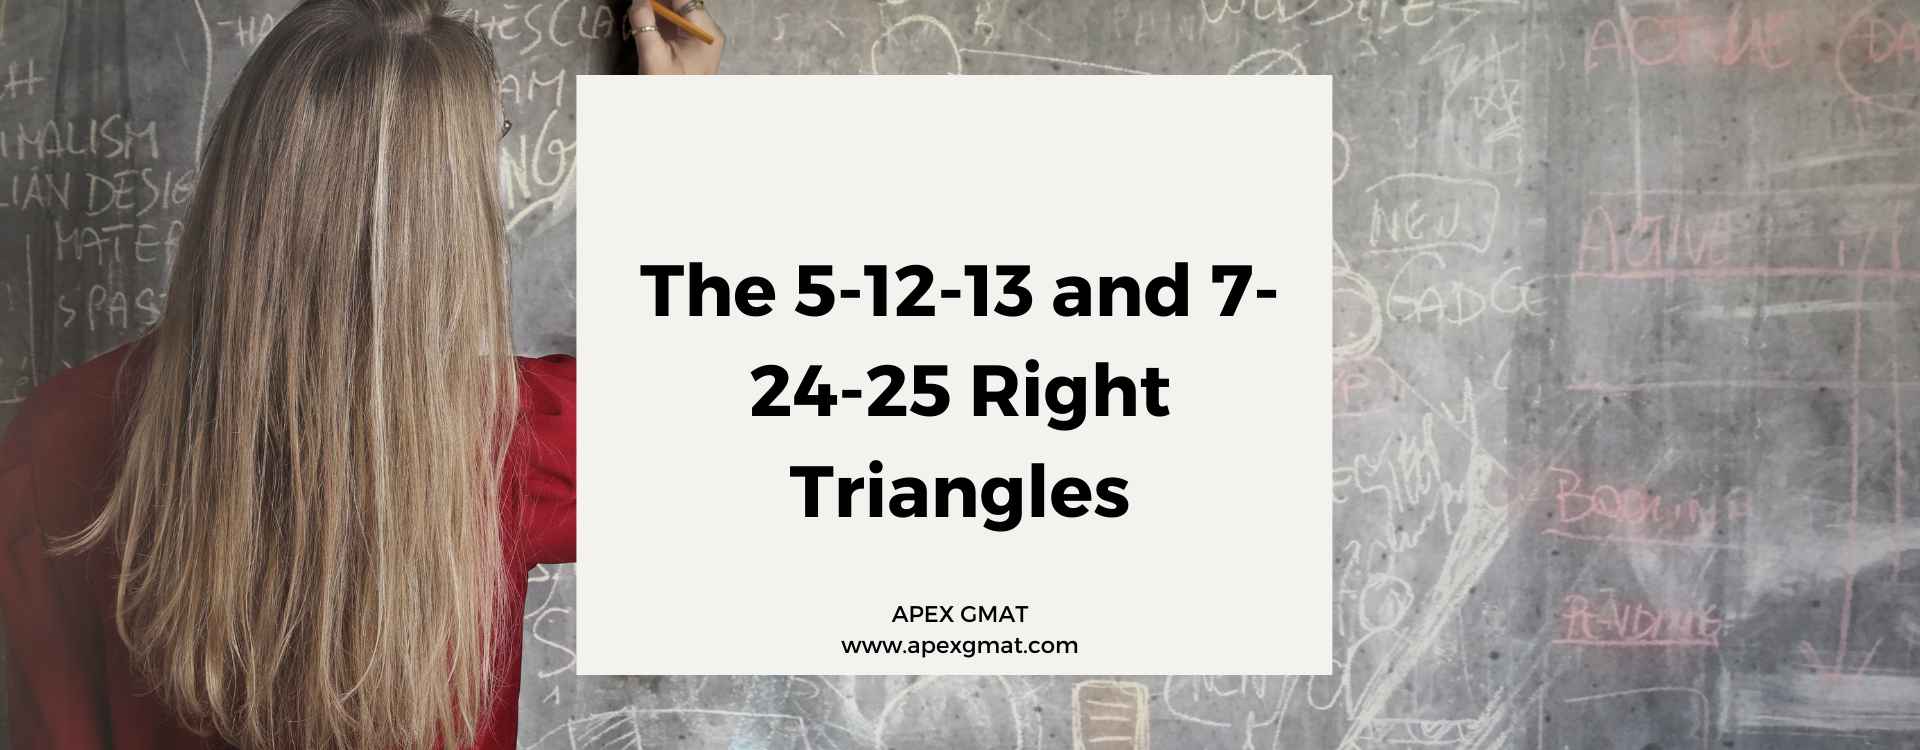 The 5-12-13 and 7-24-25 Right Triangles